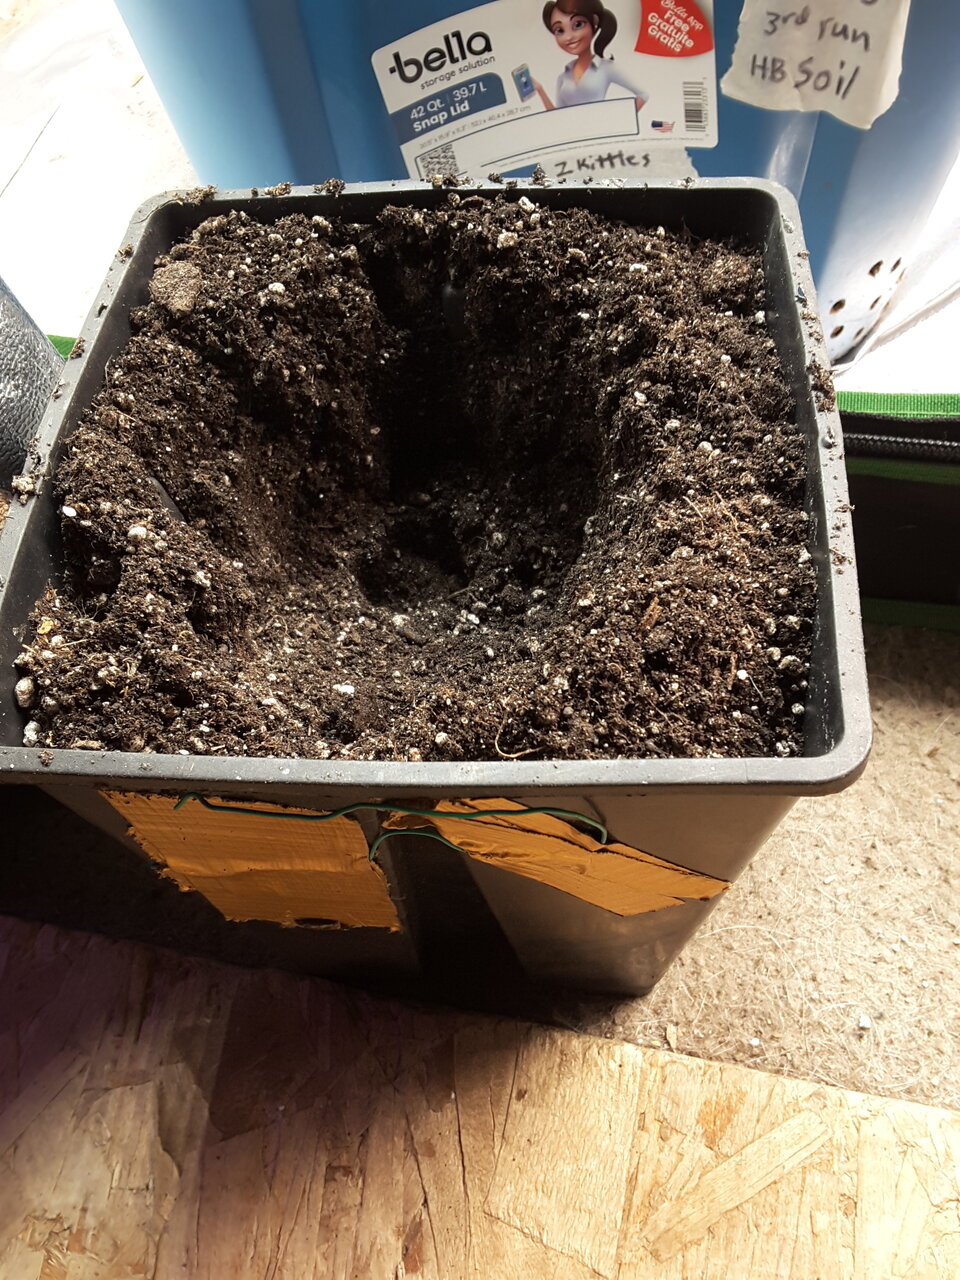 HB soil is this hole deep enough 2fill w/plain pm to start seeds